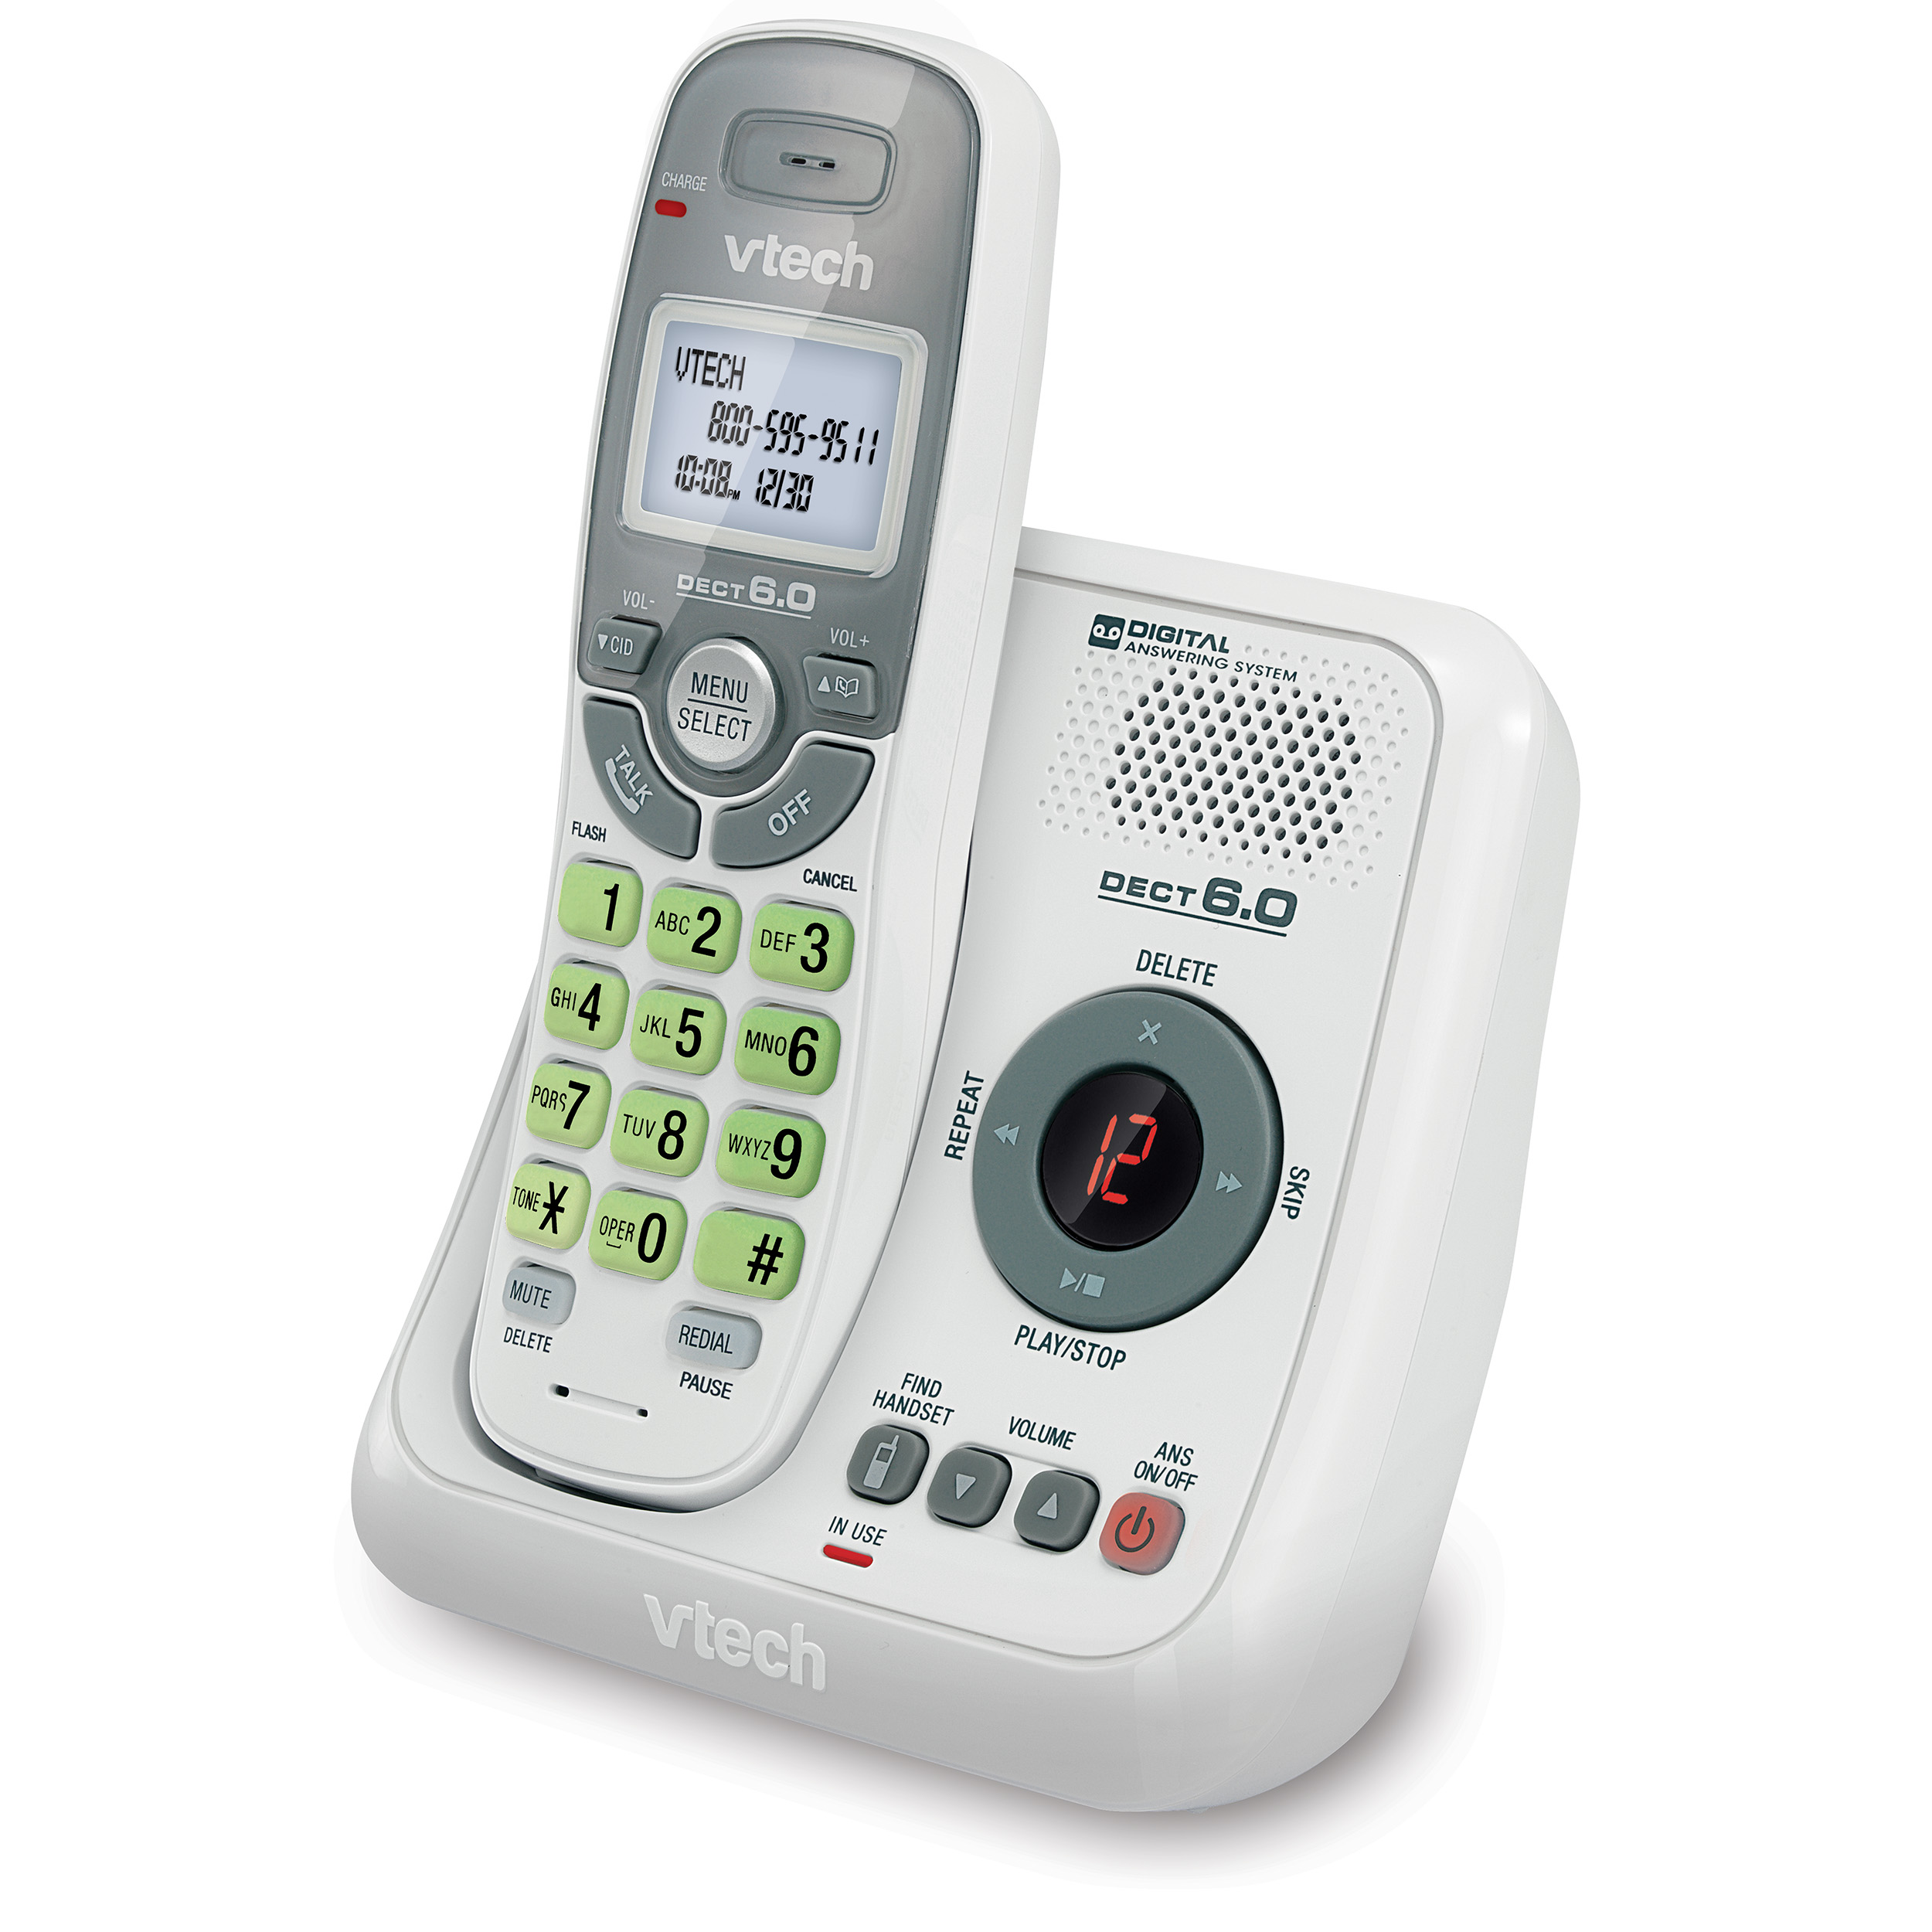 VTech CS6124 DECT 6.0 Cordless Phone with Answering System and Caller ID/Call Waiting, White - image 5 of 11